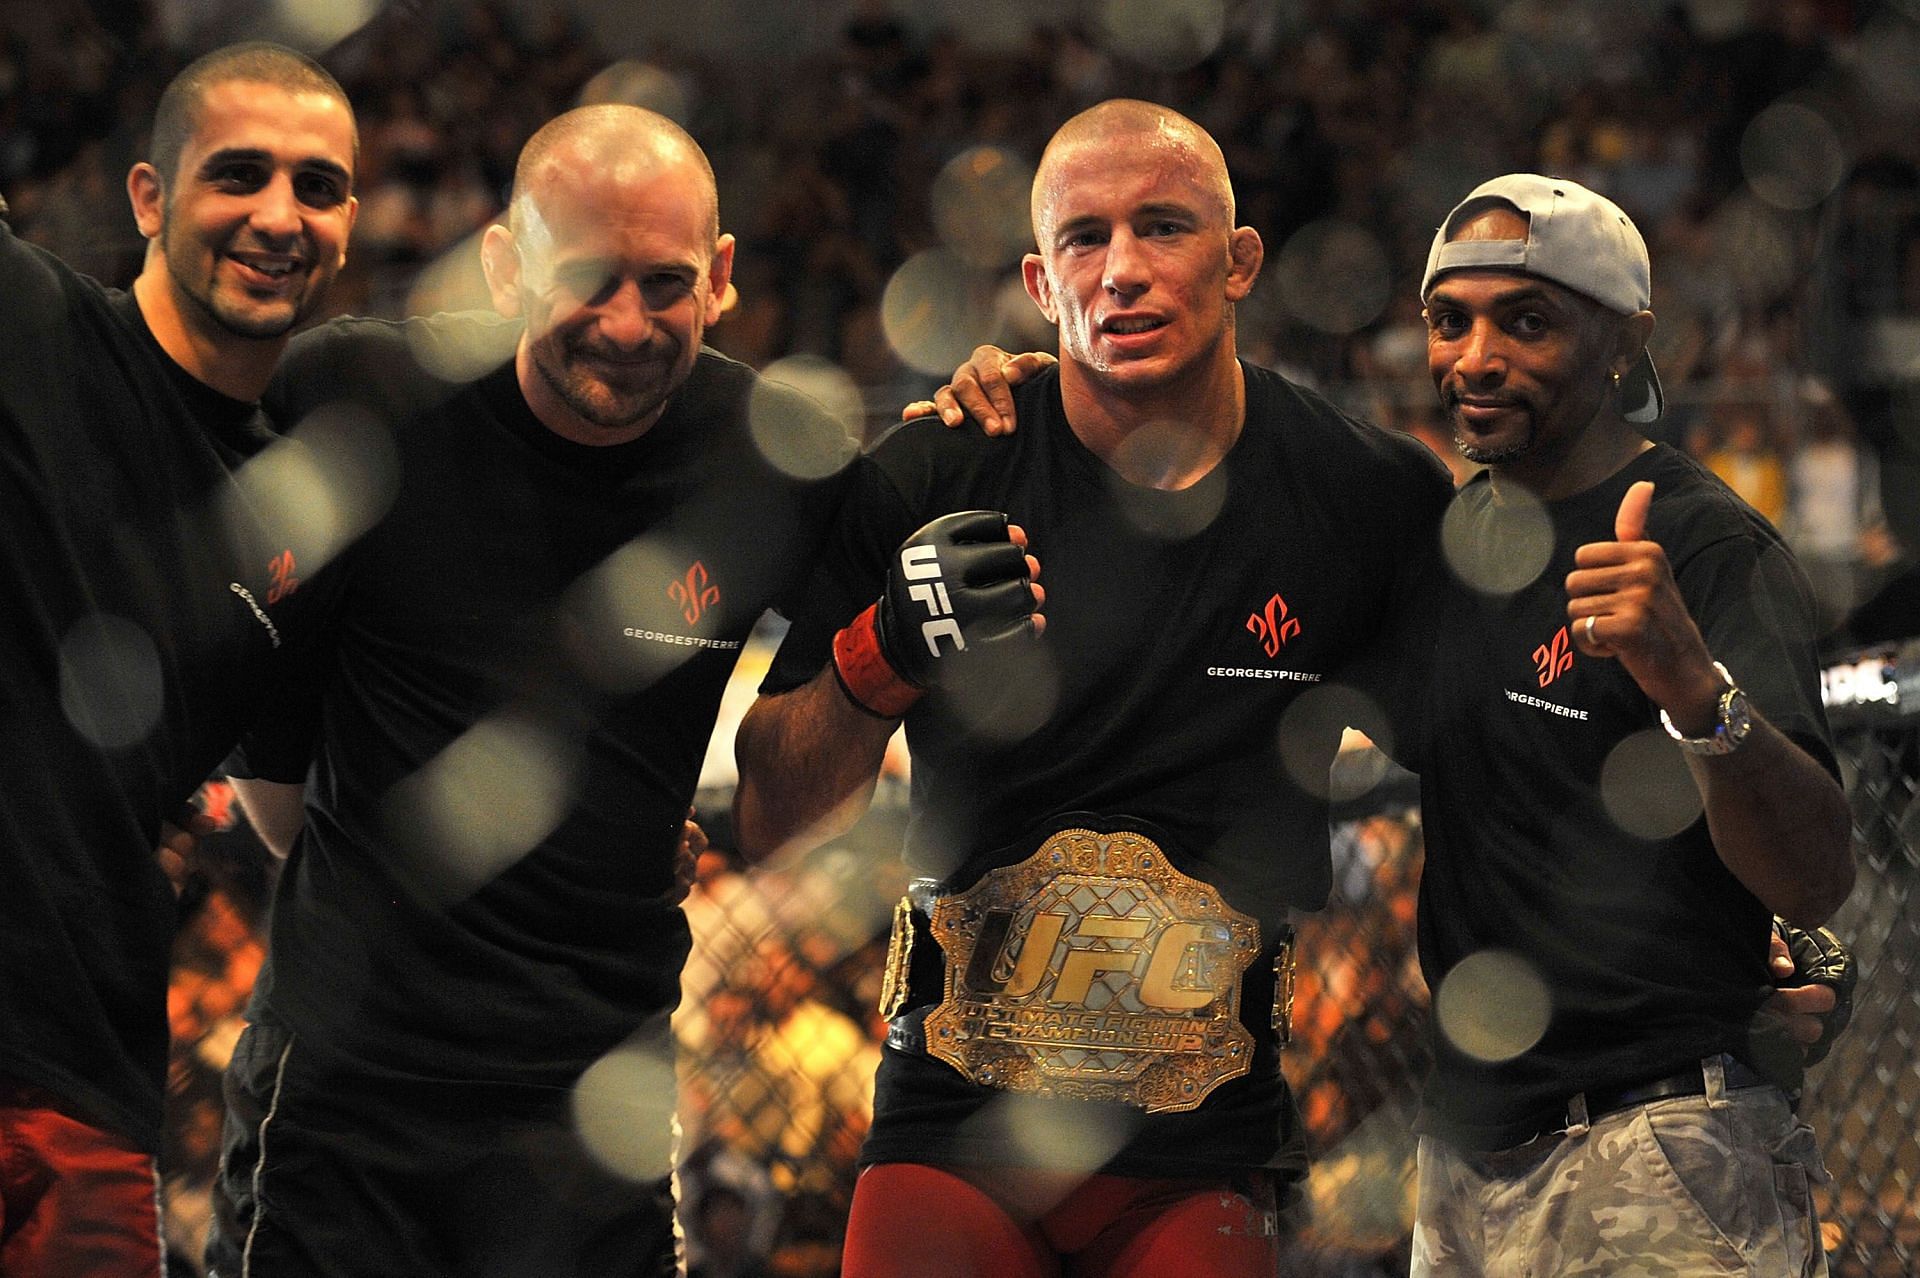 Georges St-Pierre is a rare example of a fighter who went out on top